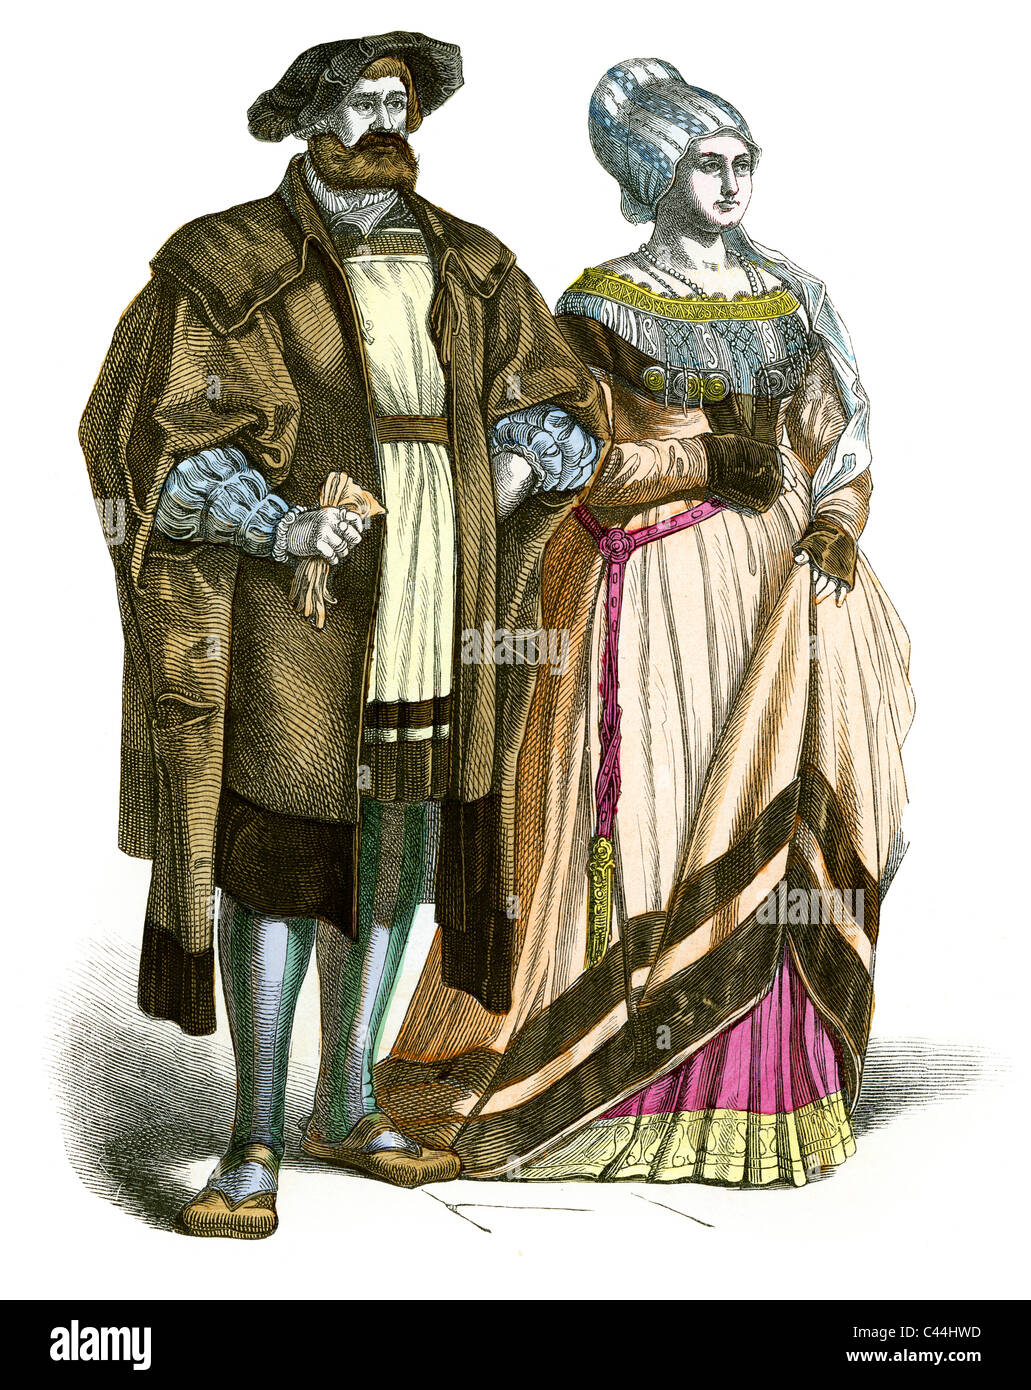 16th Century German Nobleman and Lady in fashionable dress Stock Photo